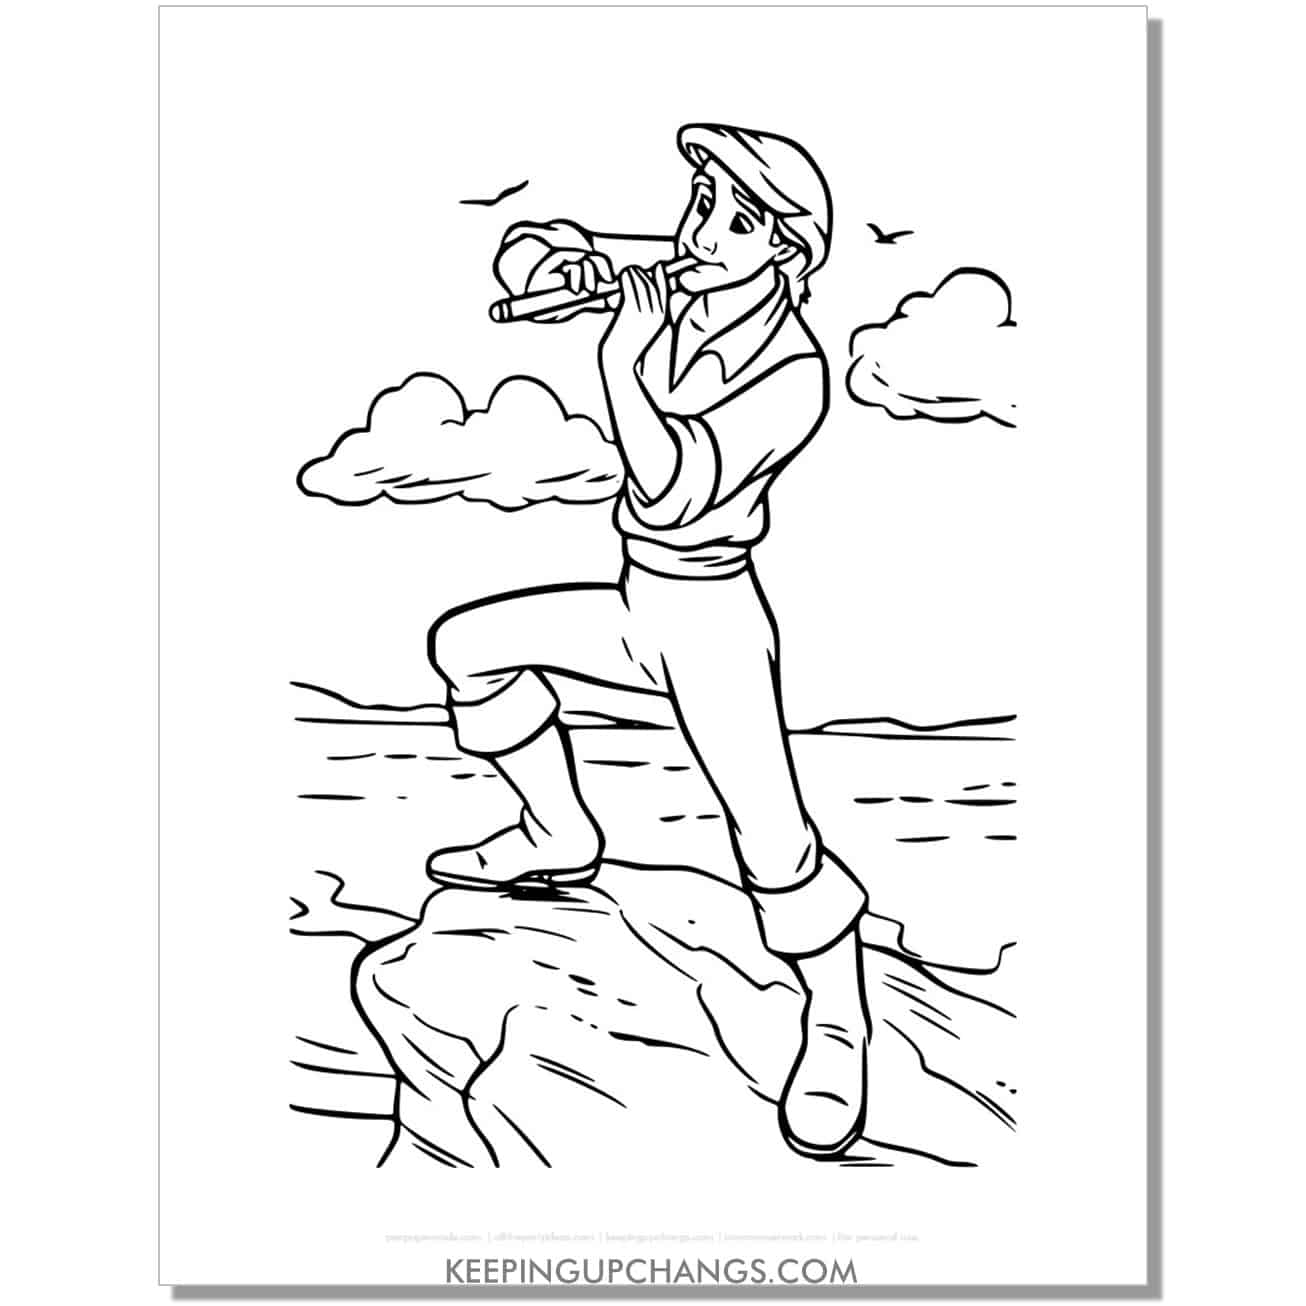 little mermaid prince eric playing music on flute coloring page, sheet.